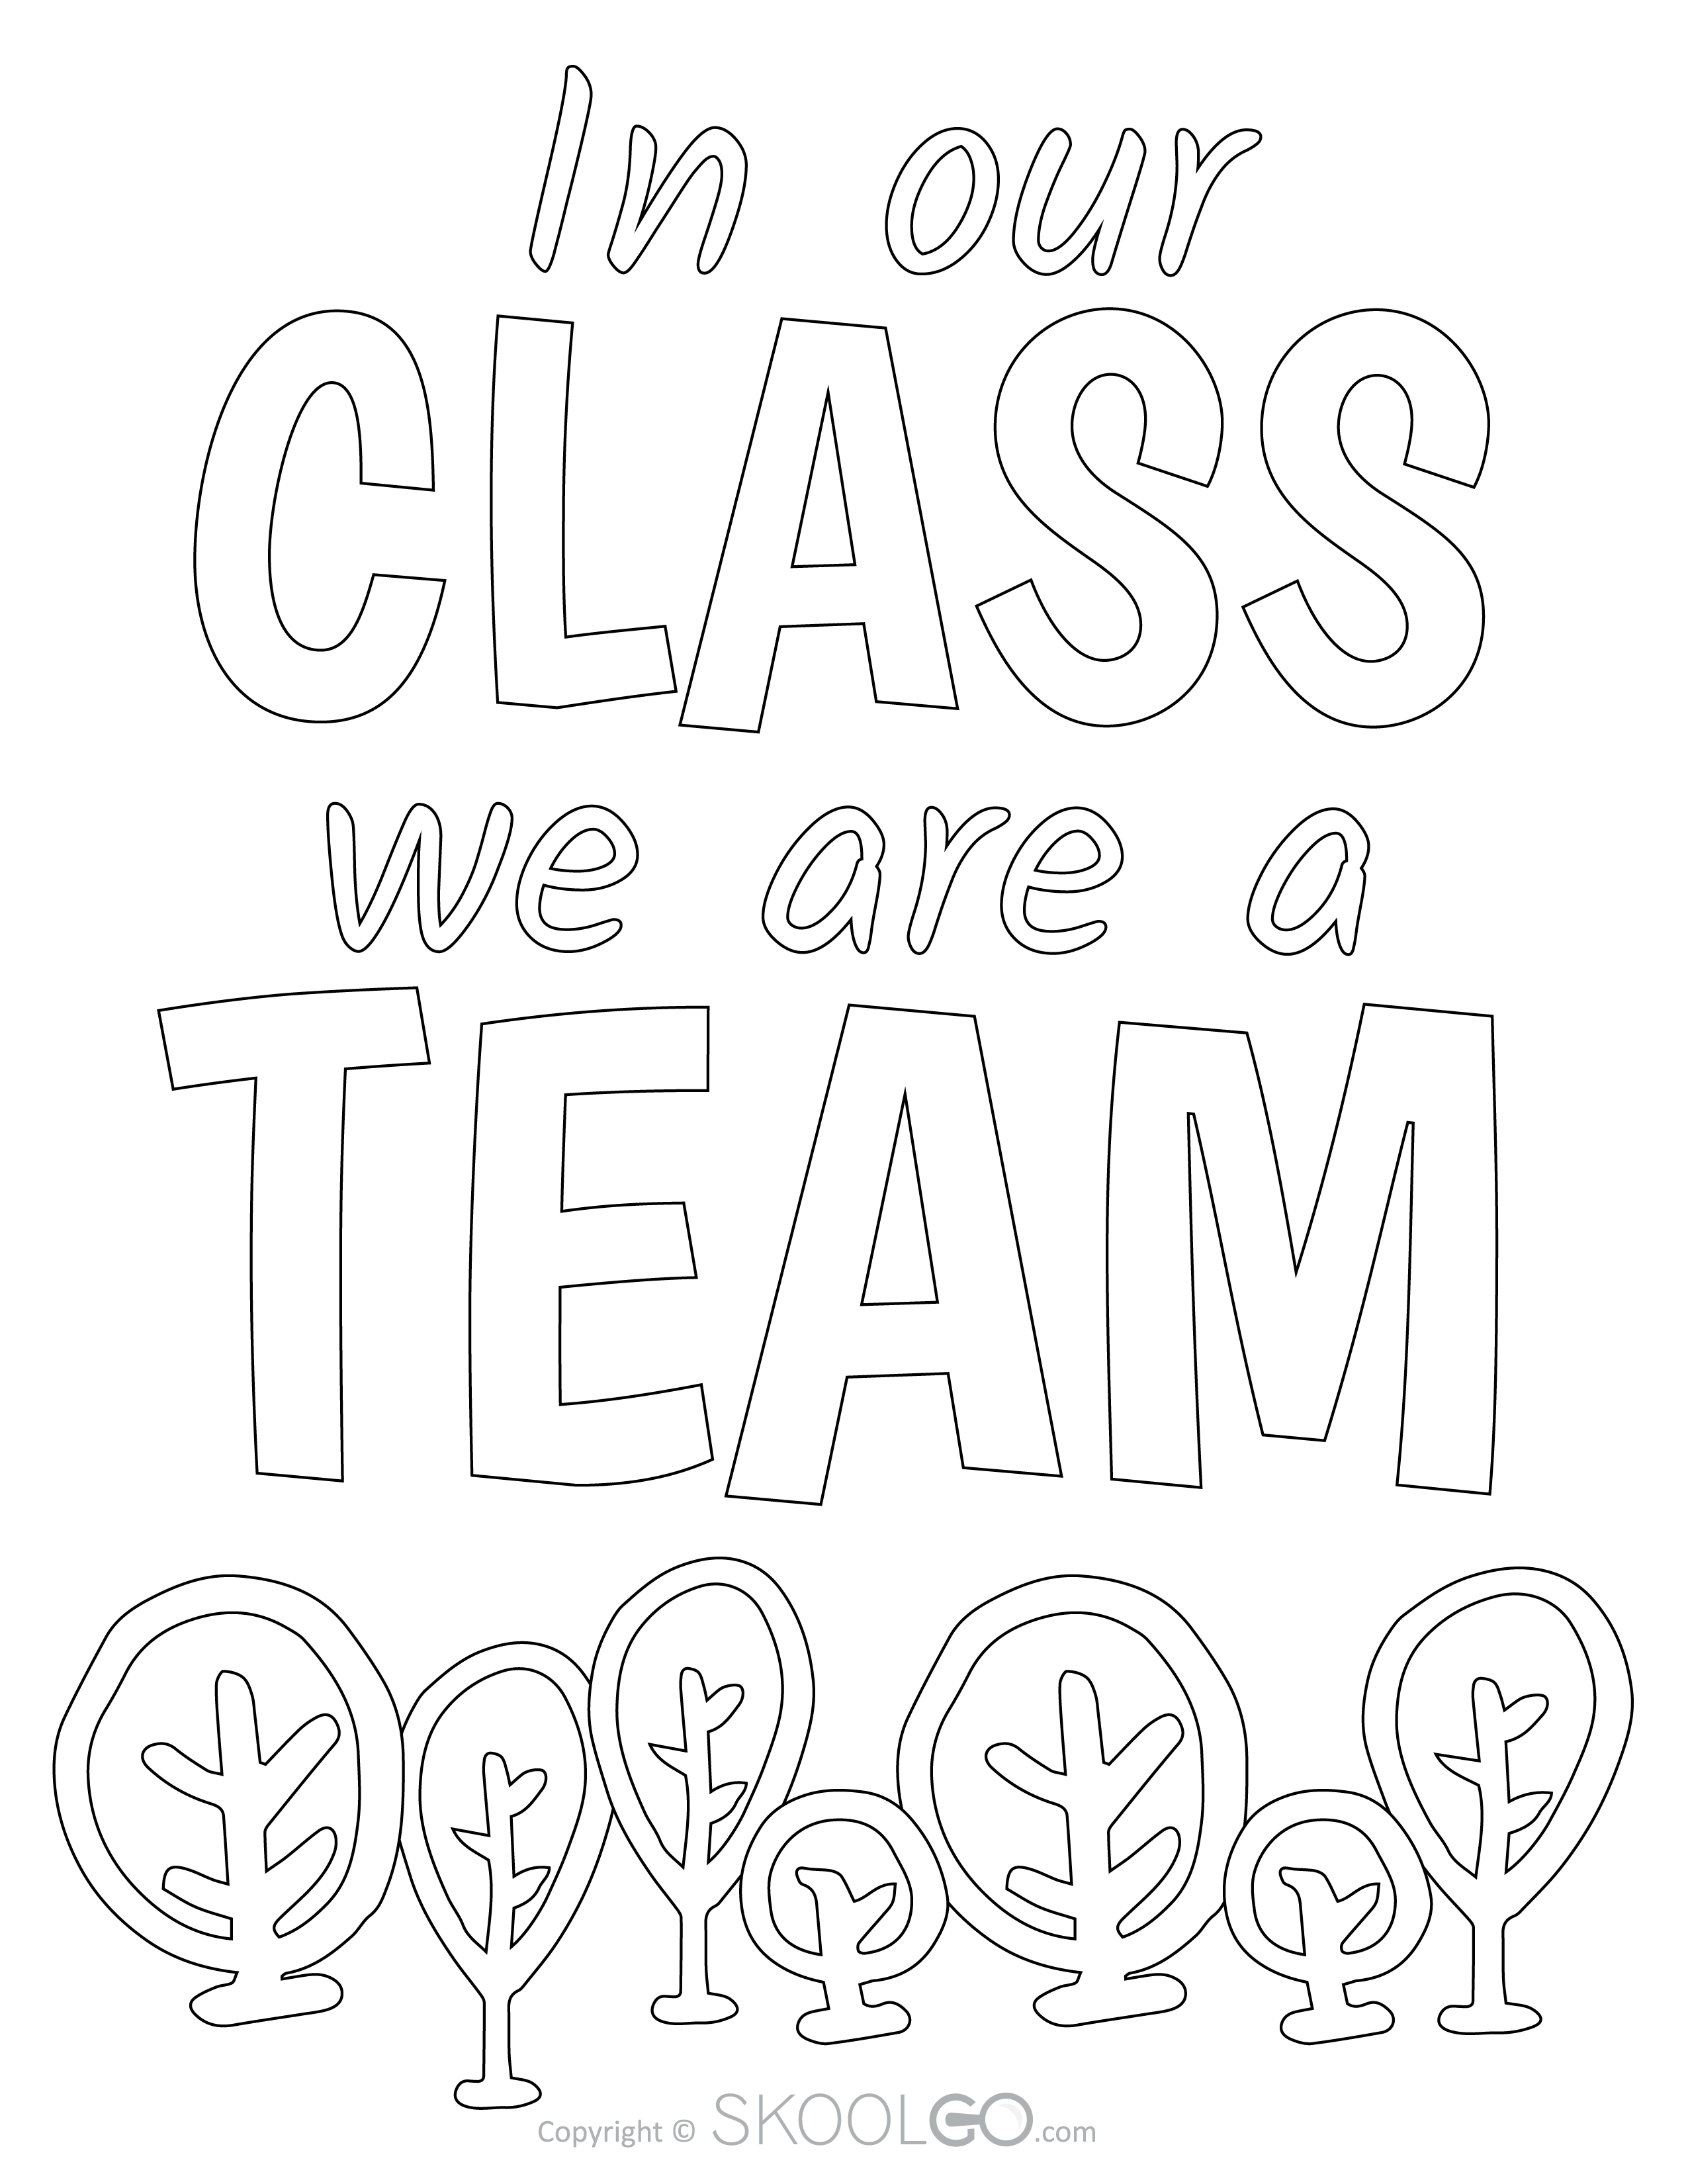 In Our Class We Are A Team - Free Classroom Poster Coloring Version